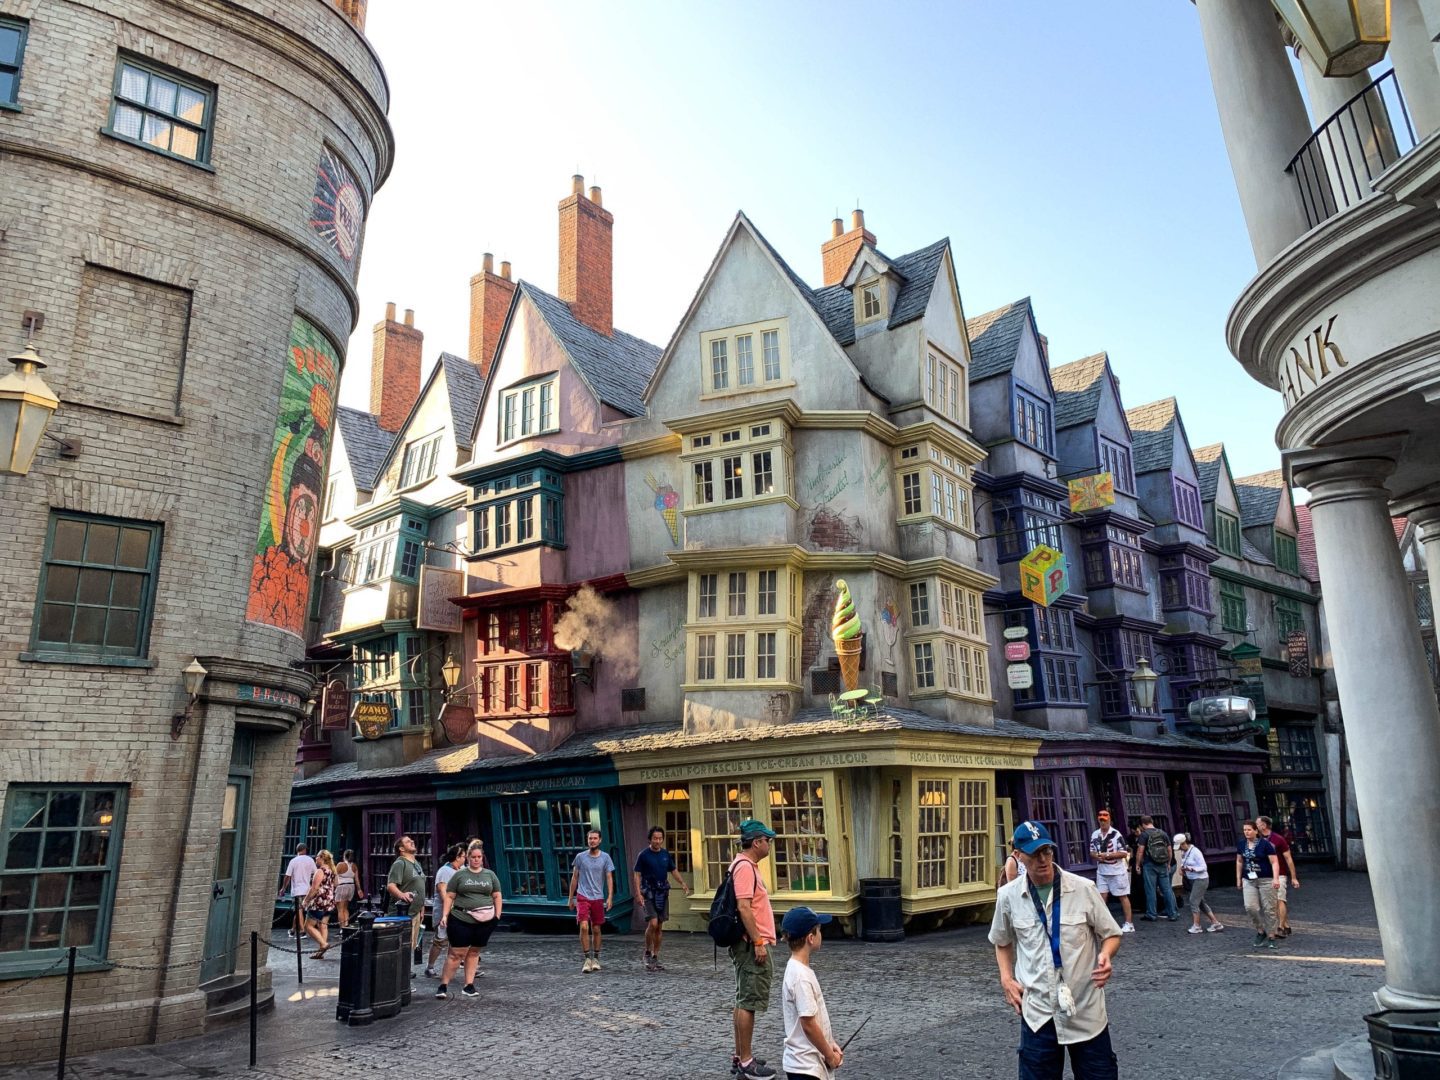 Universal Studios Diagon Alley Wizarding World of Harry Potter, Packing list for Universal Studios Orlando